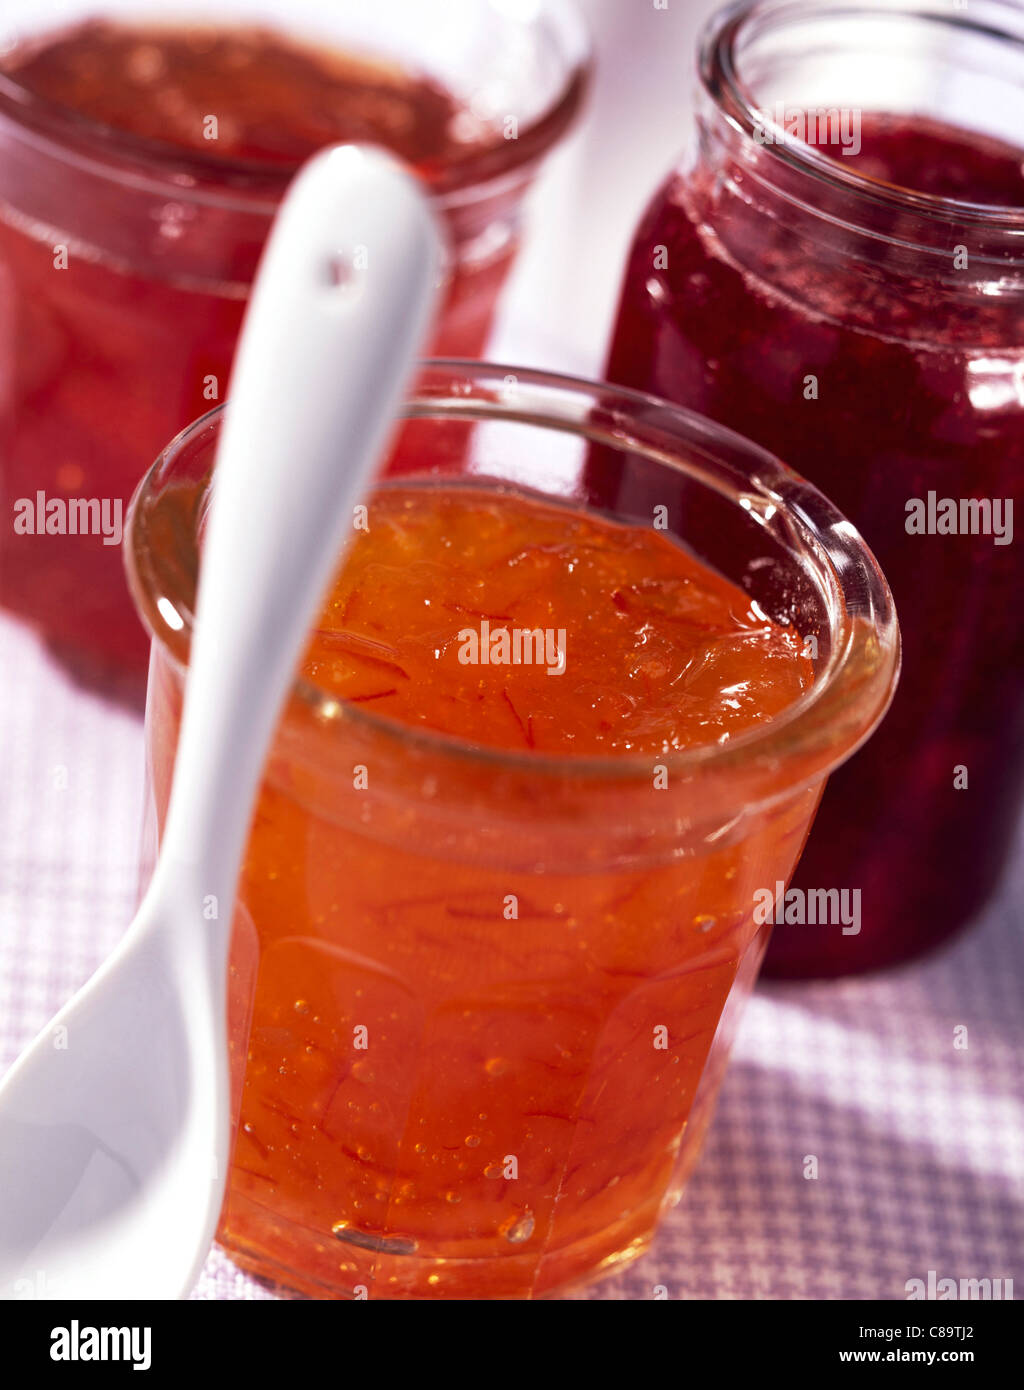 Pots of jam and white spoon Stock Photo